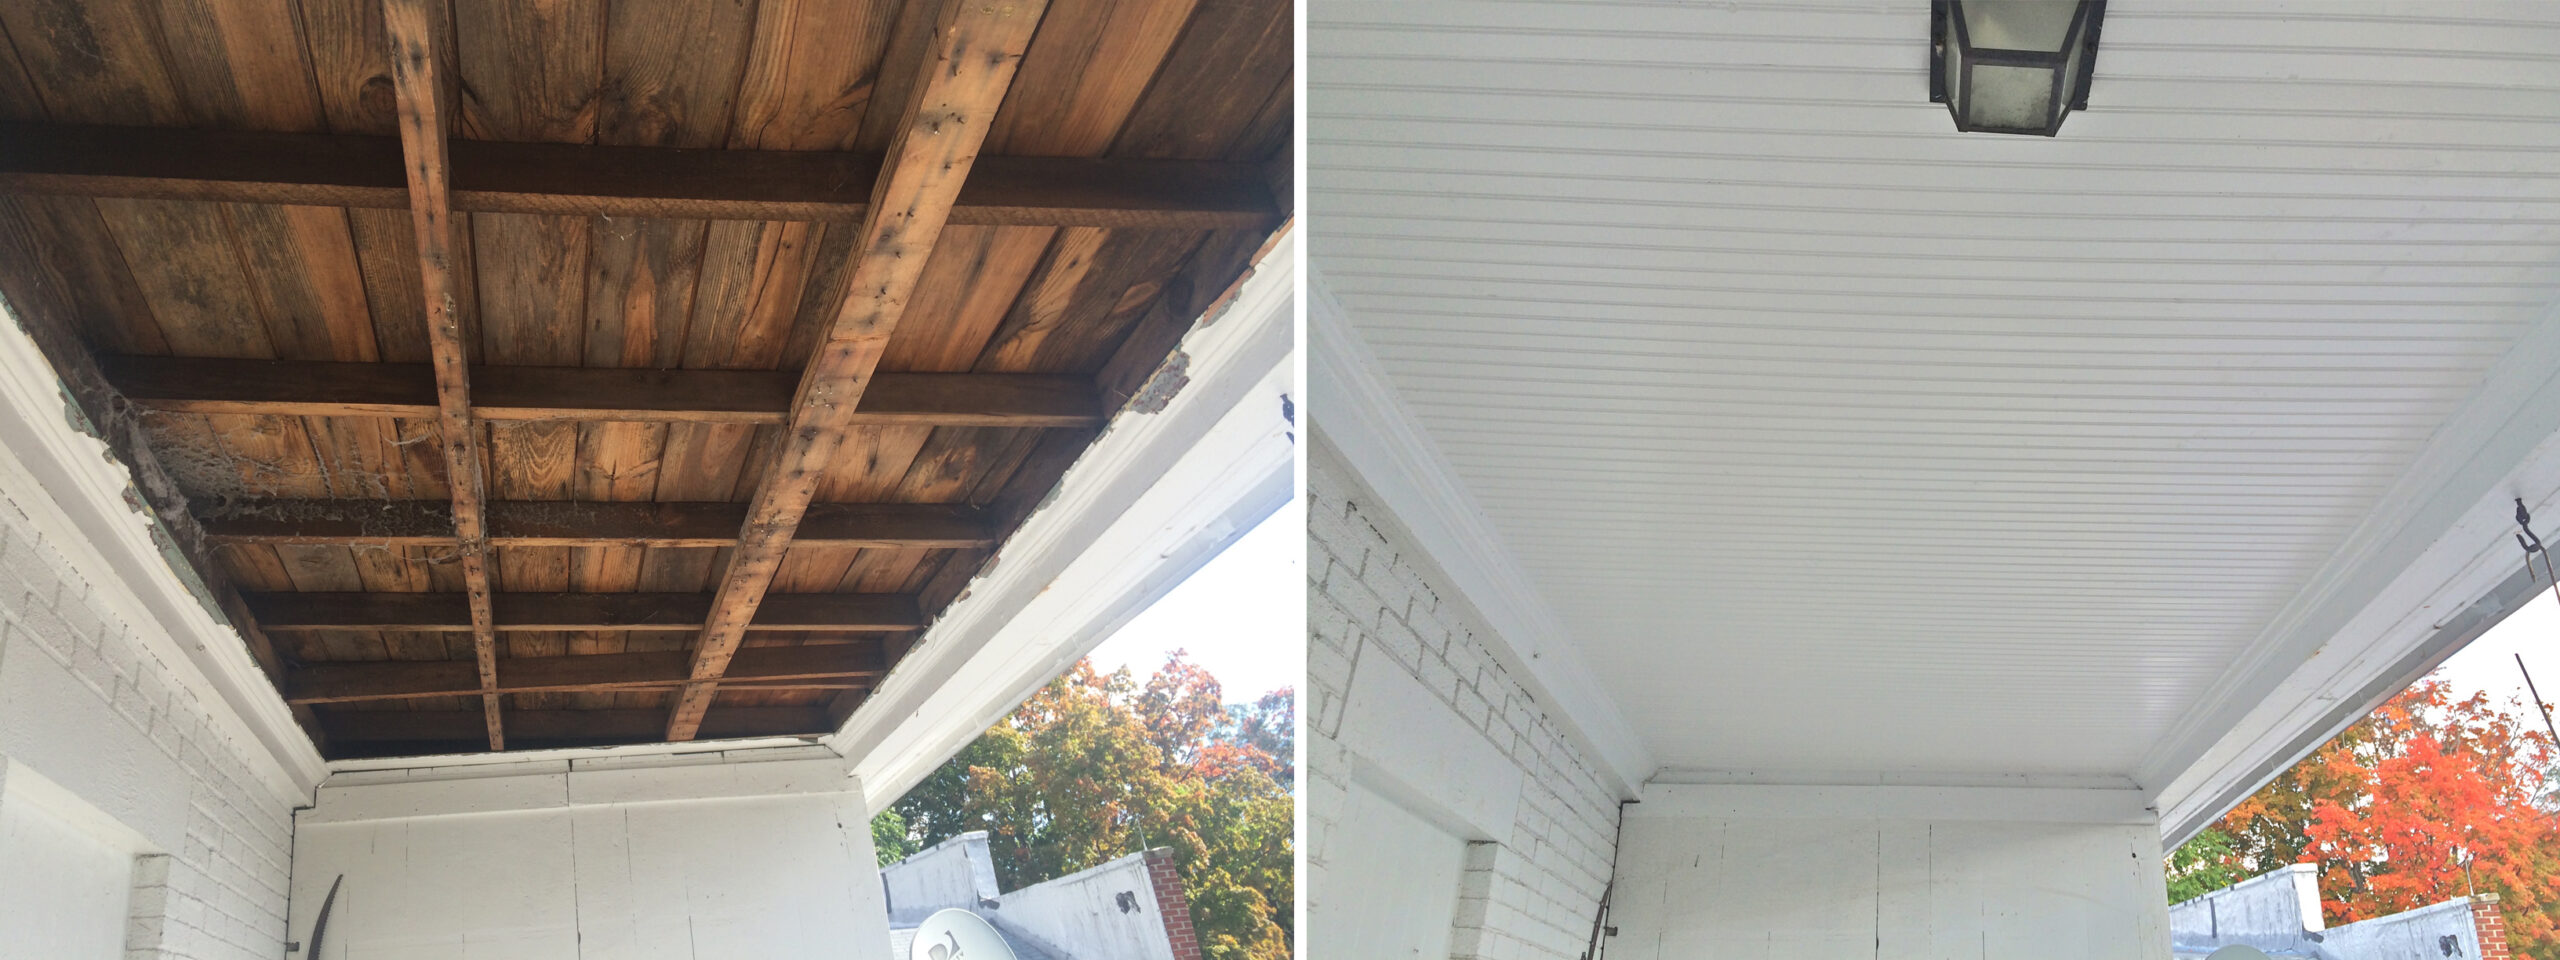 Carpentry repair before and after